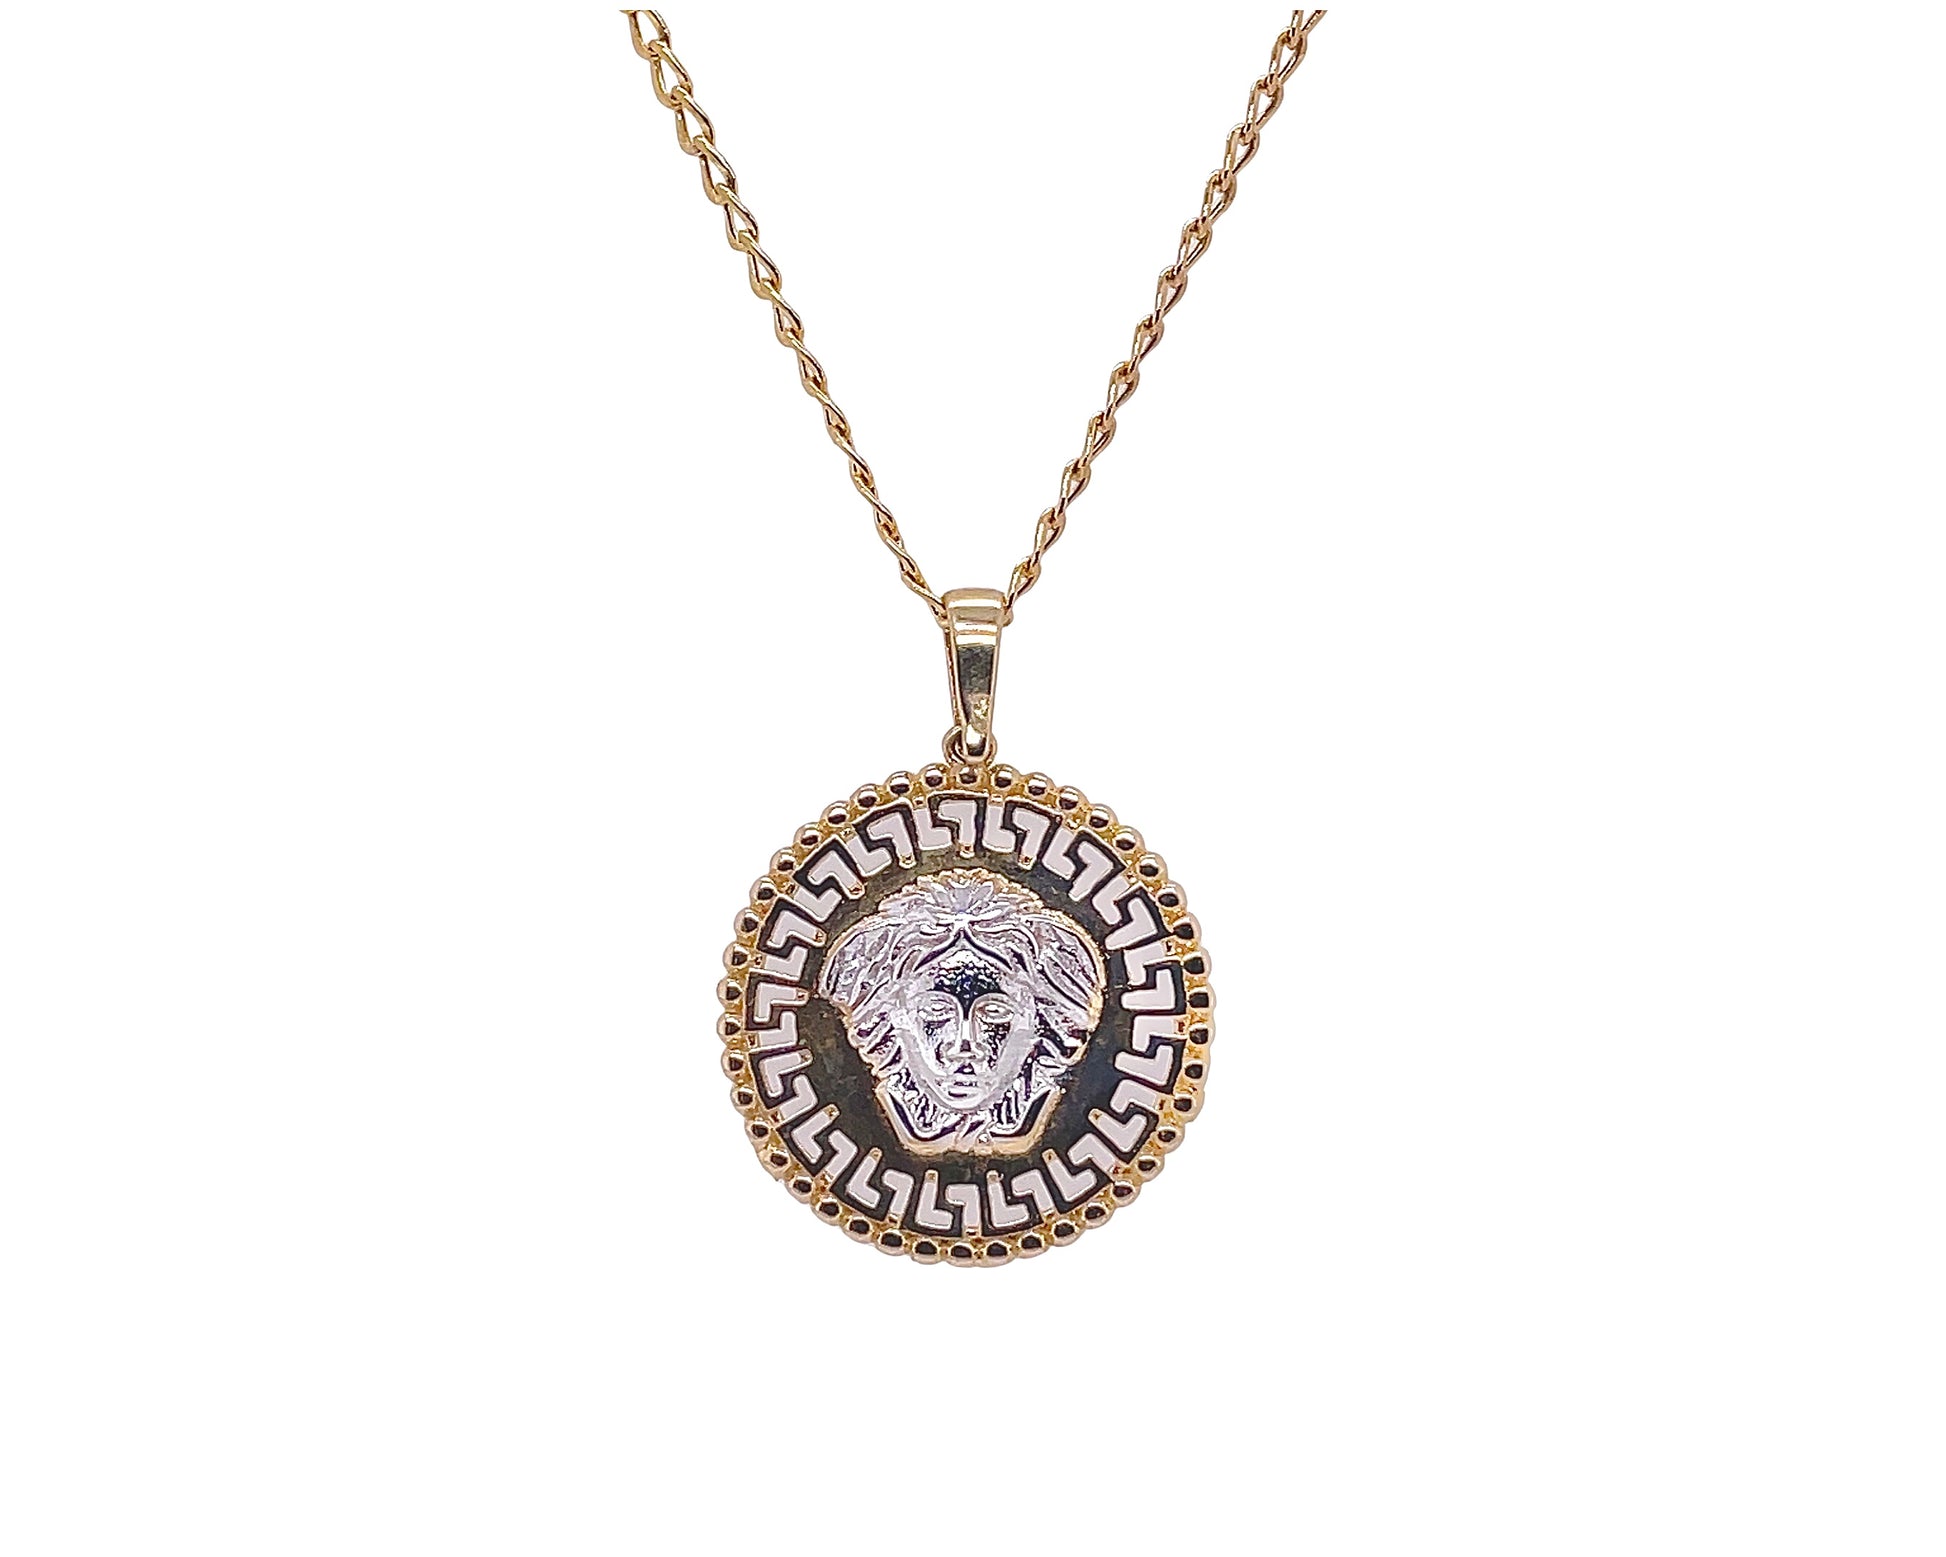 10k two-tone gold medusa pendant with chain 